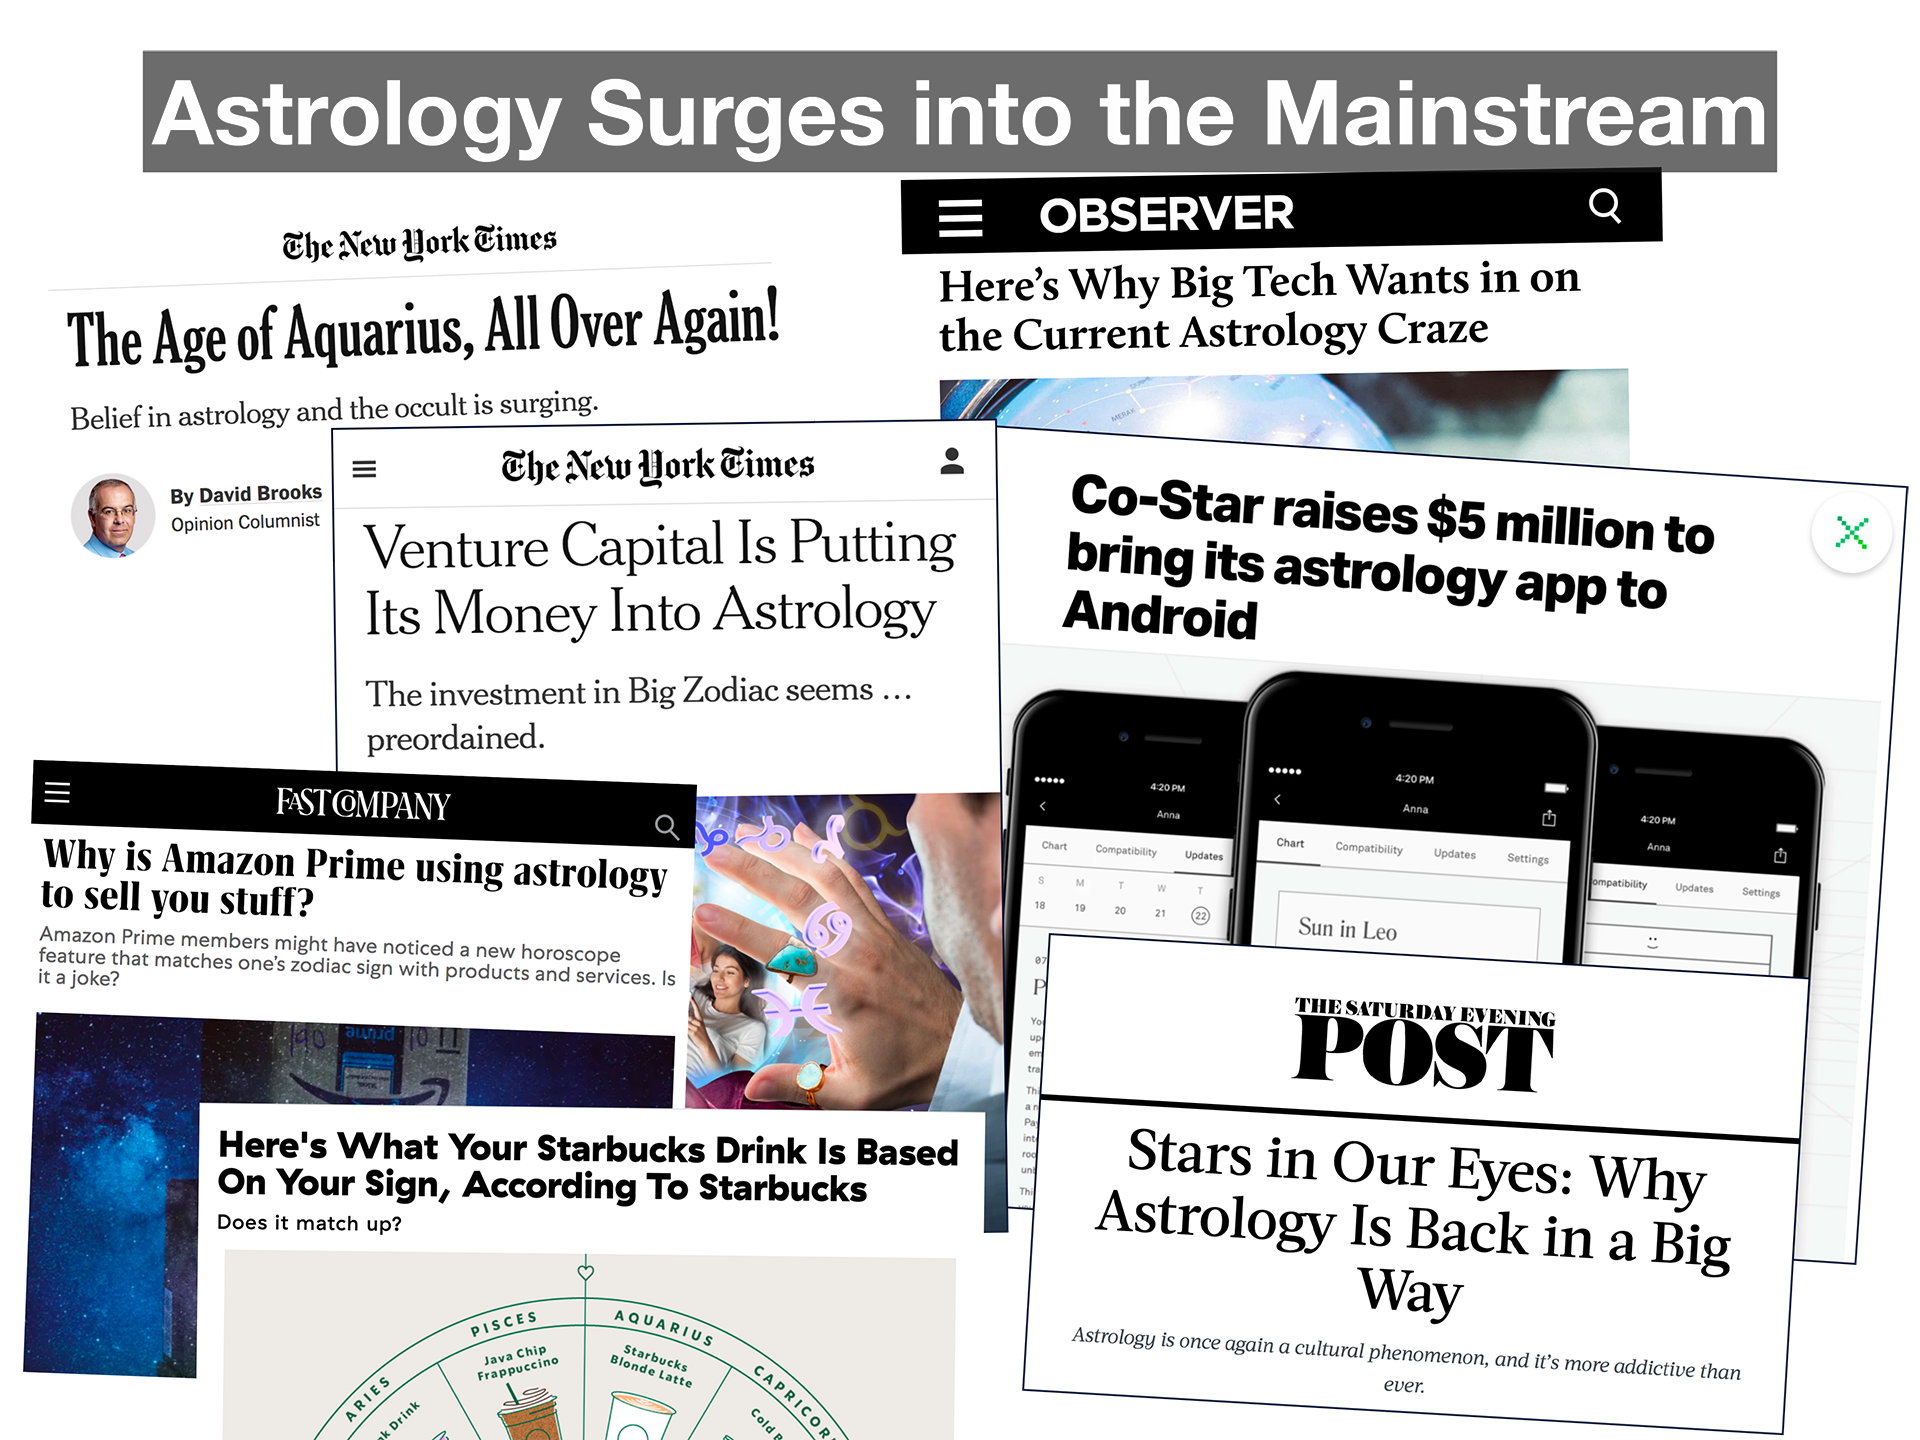 Astrology-Surges2